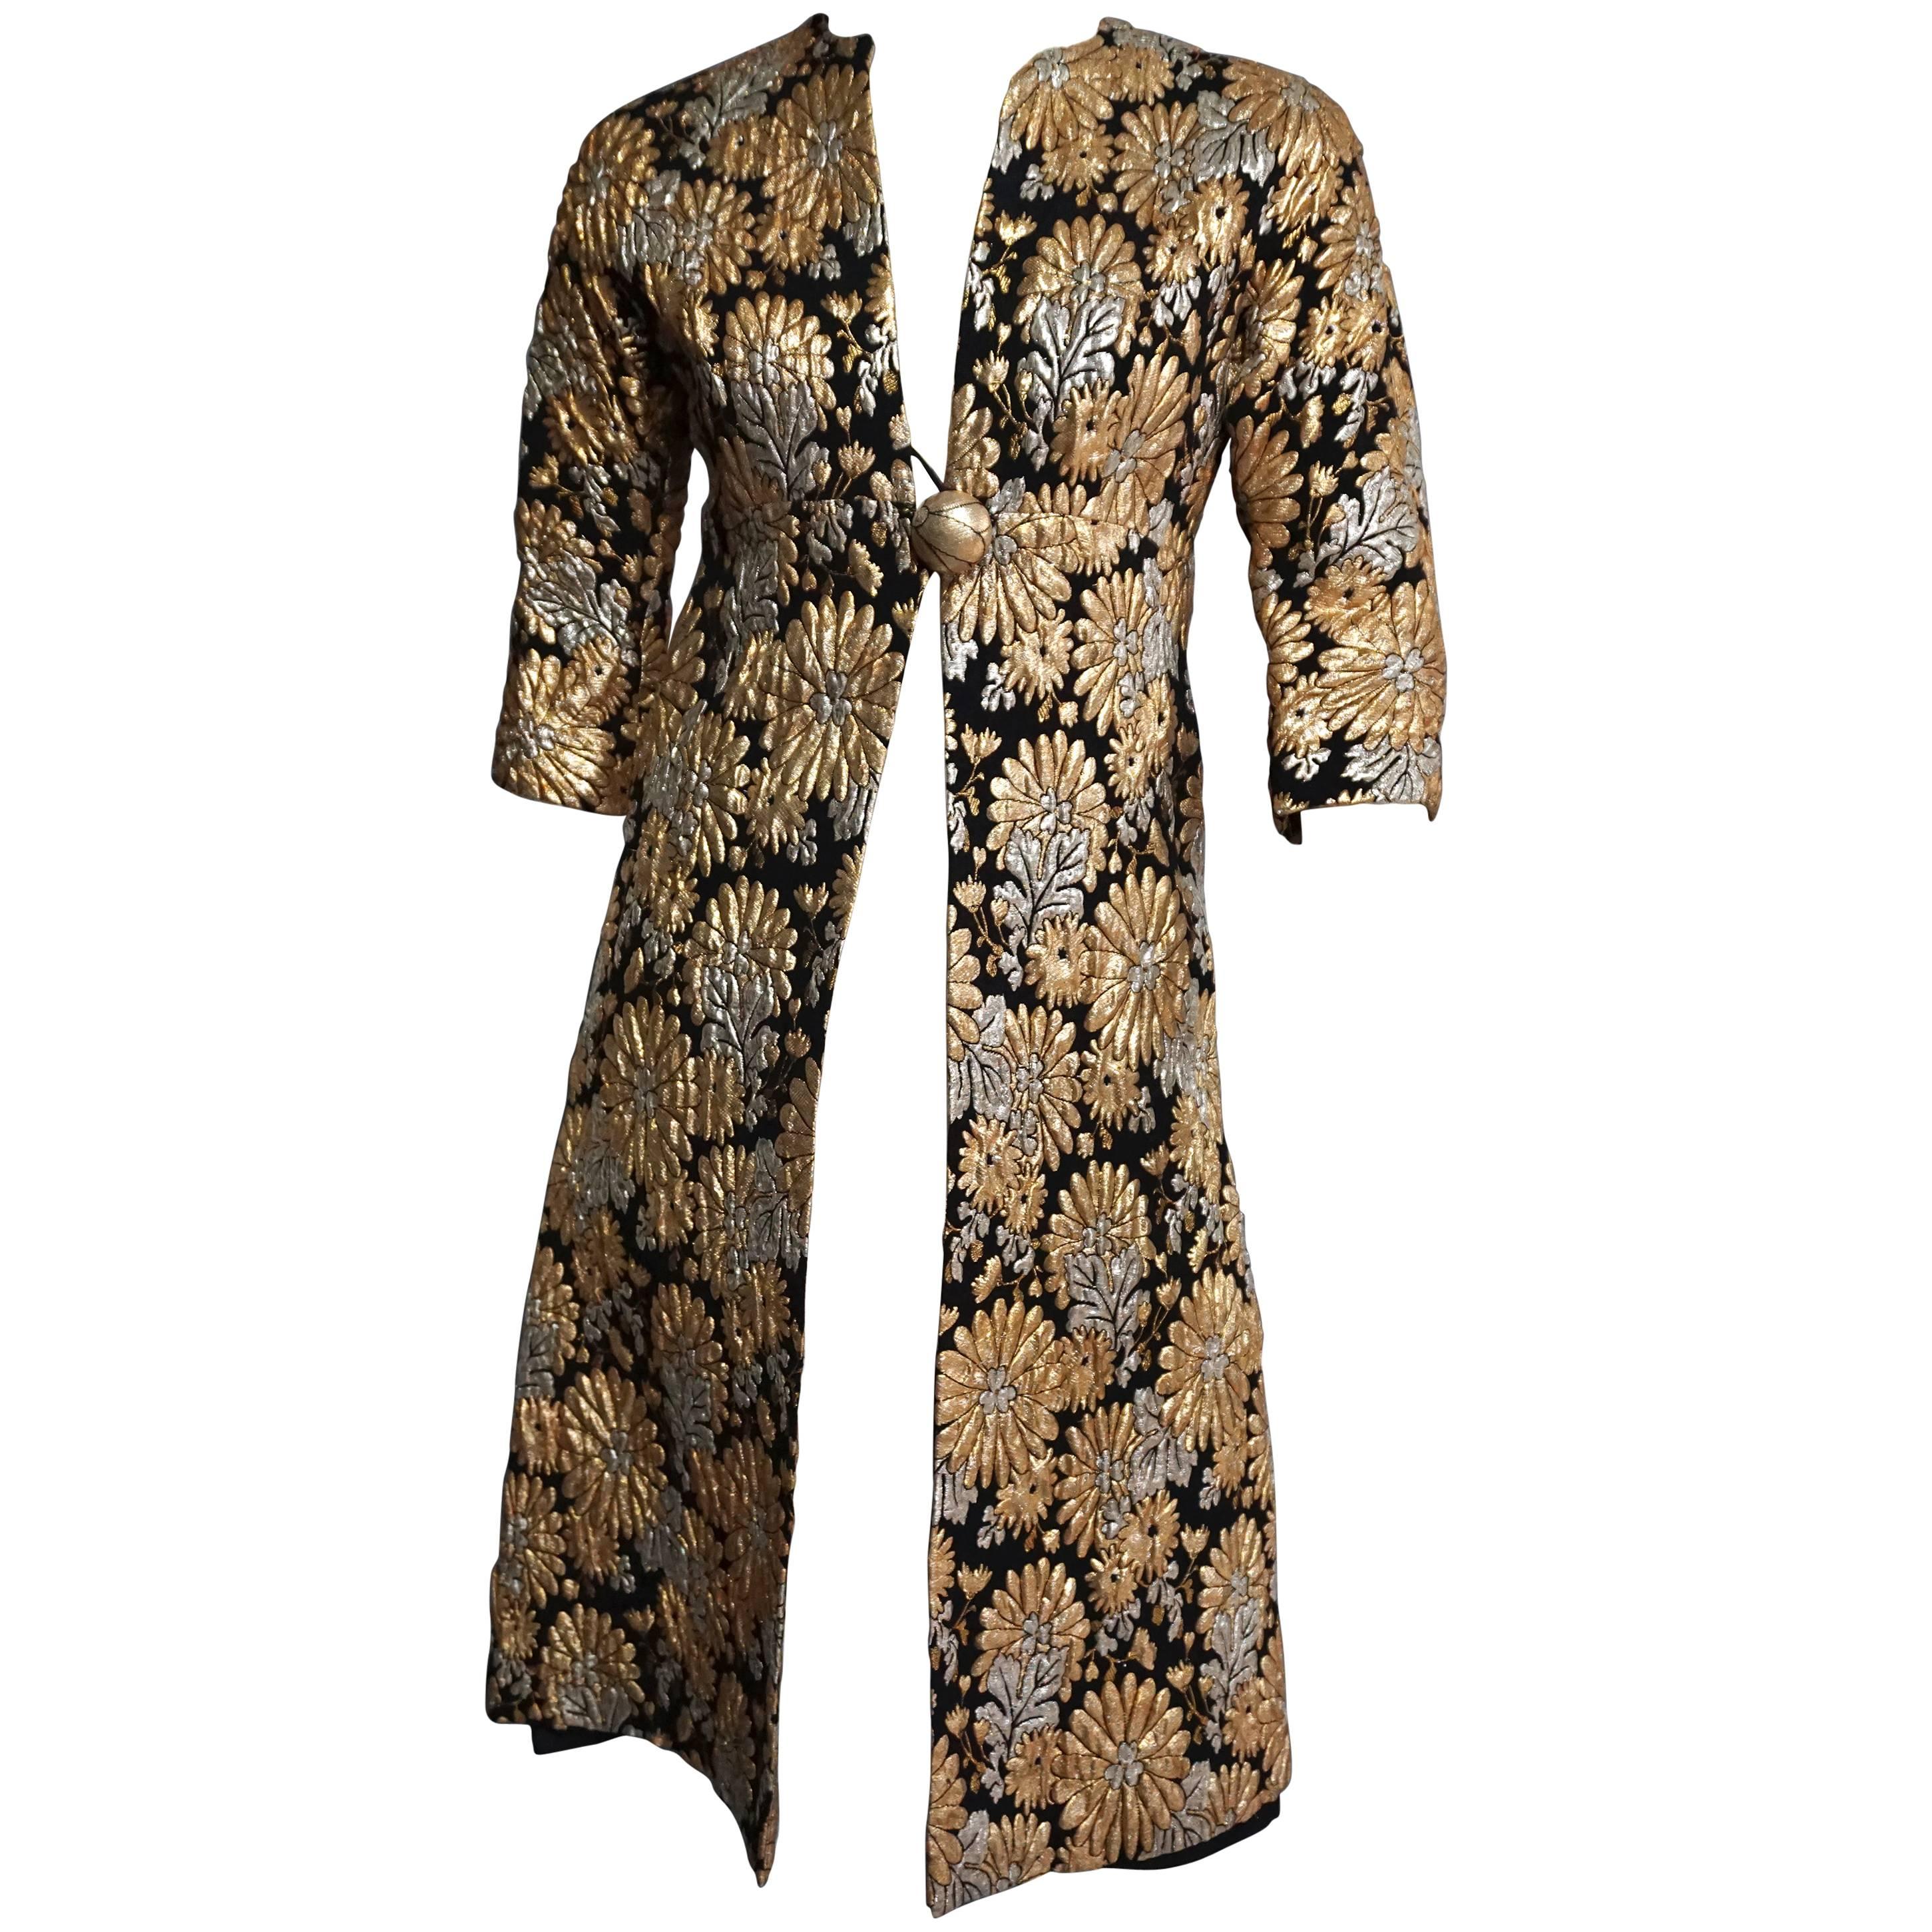 SUZY PERETTE Gold & Silver Lame Floral Print Coat with